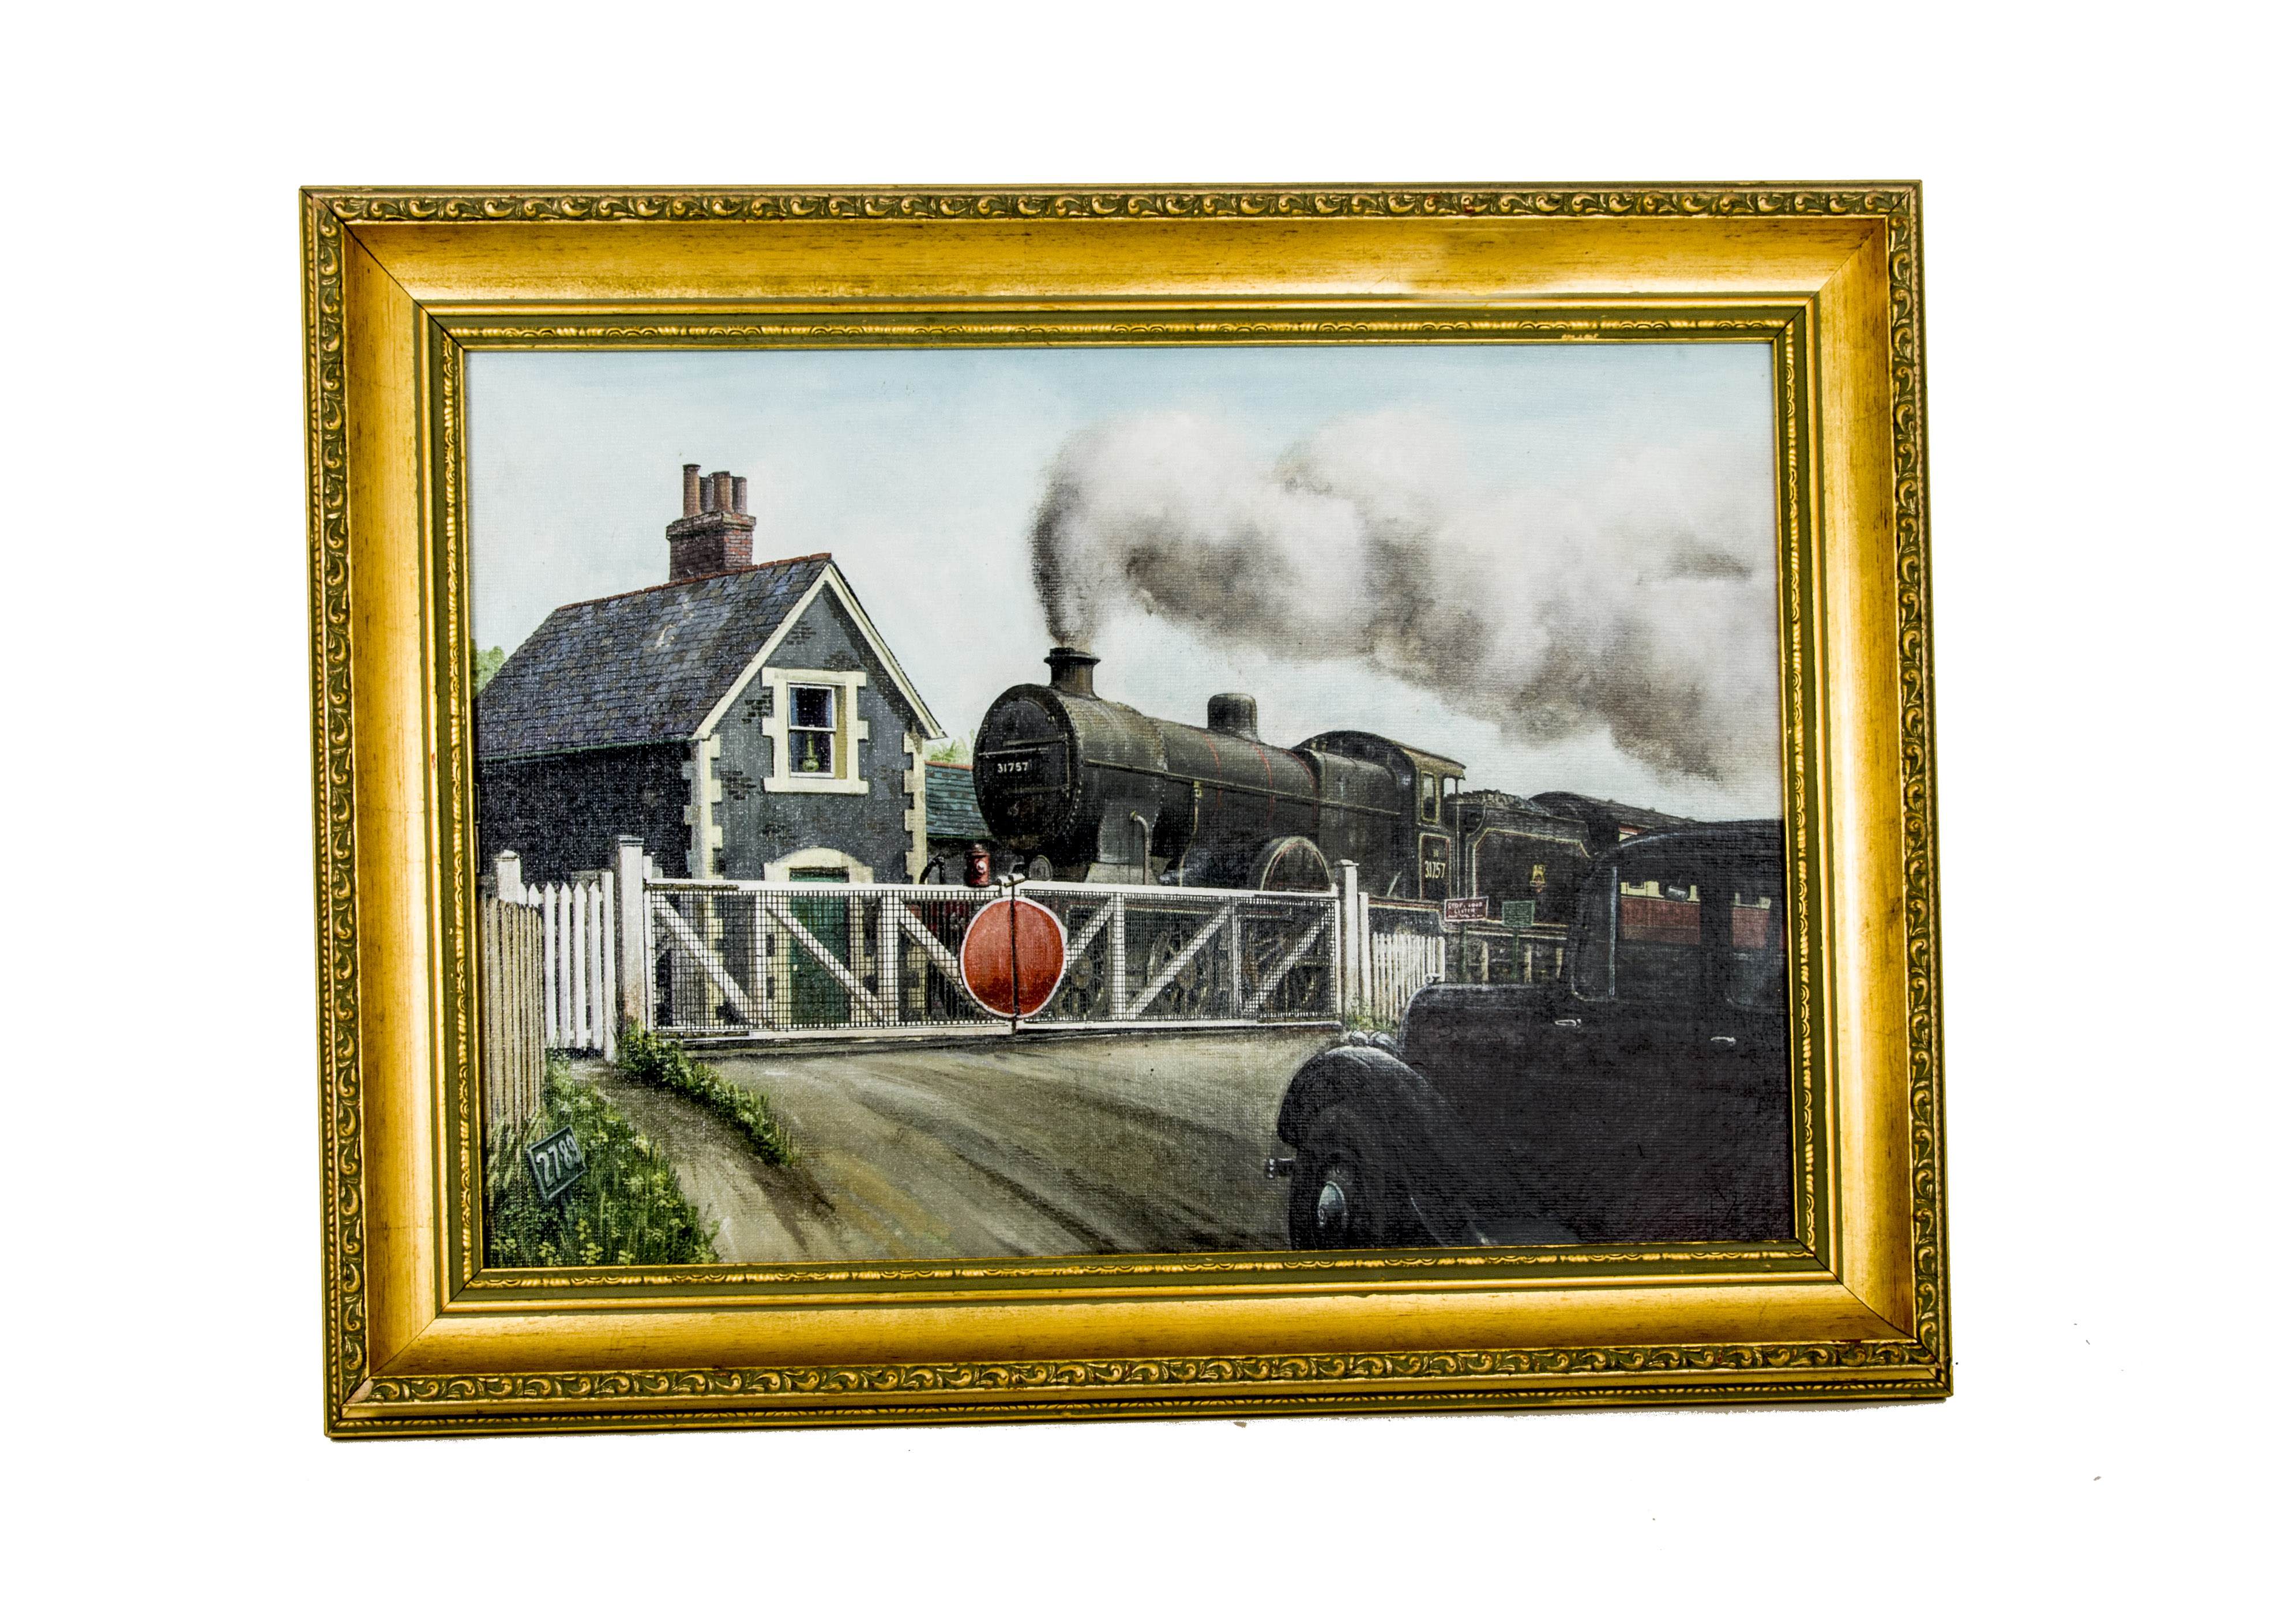 Oil Painting L1 Class 4-4-0 British Railways 31757 Locomotive, depicted in a 1930s scene